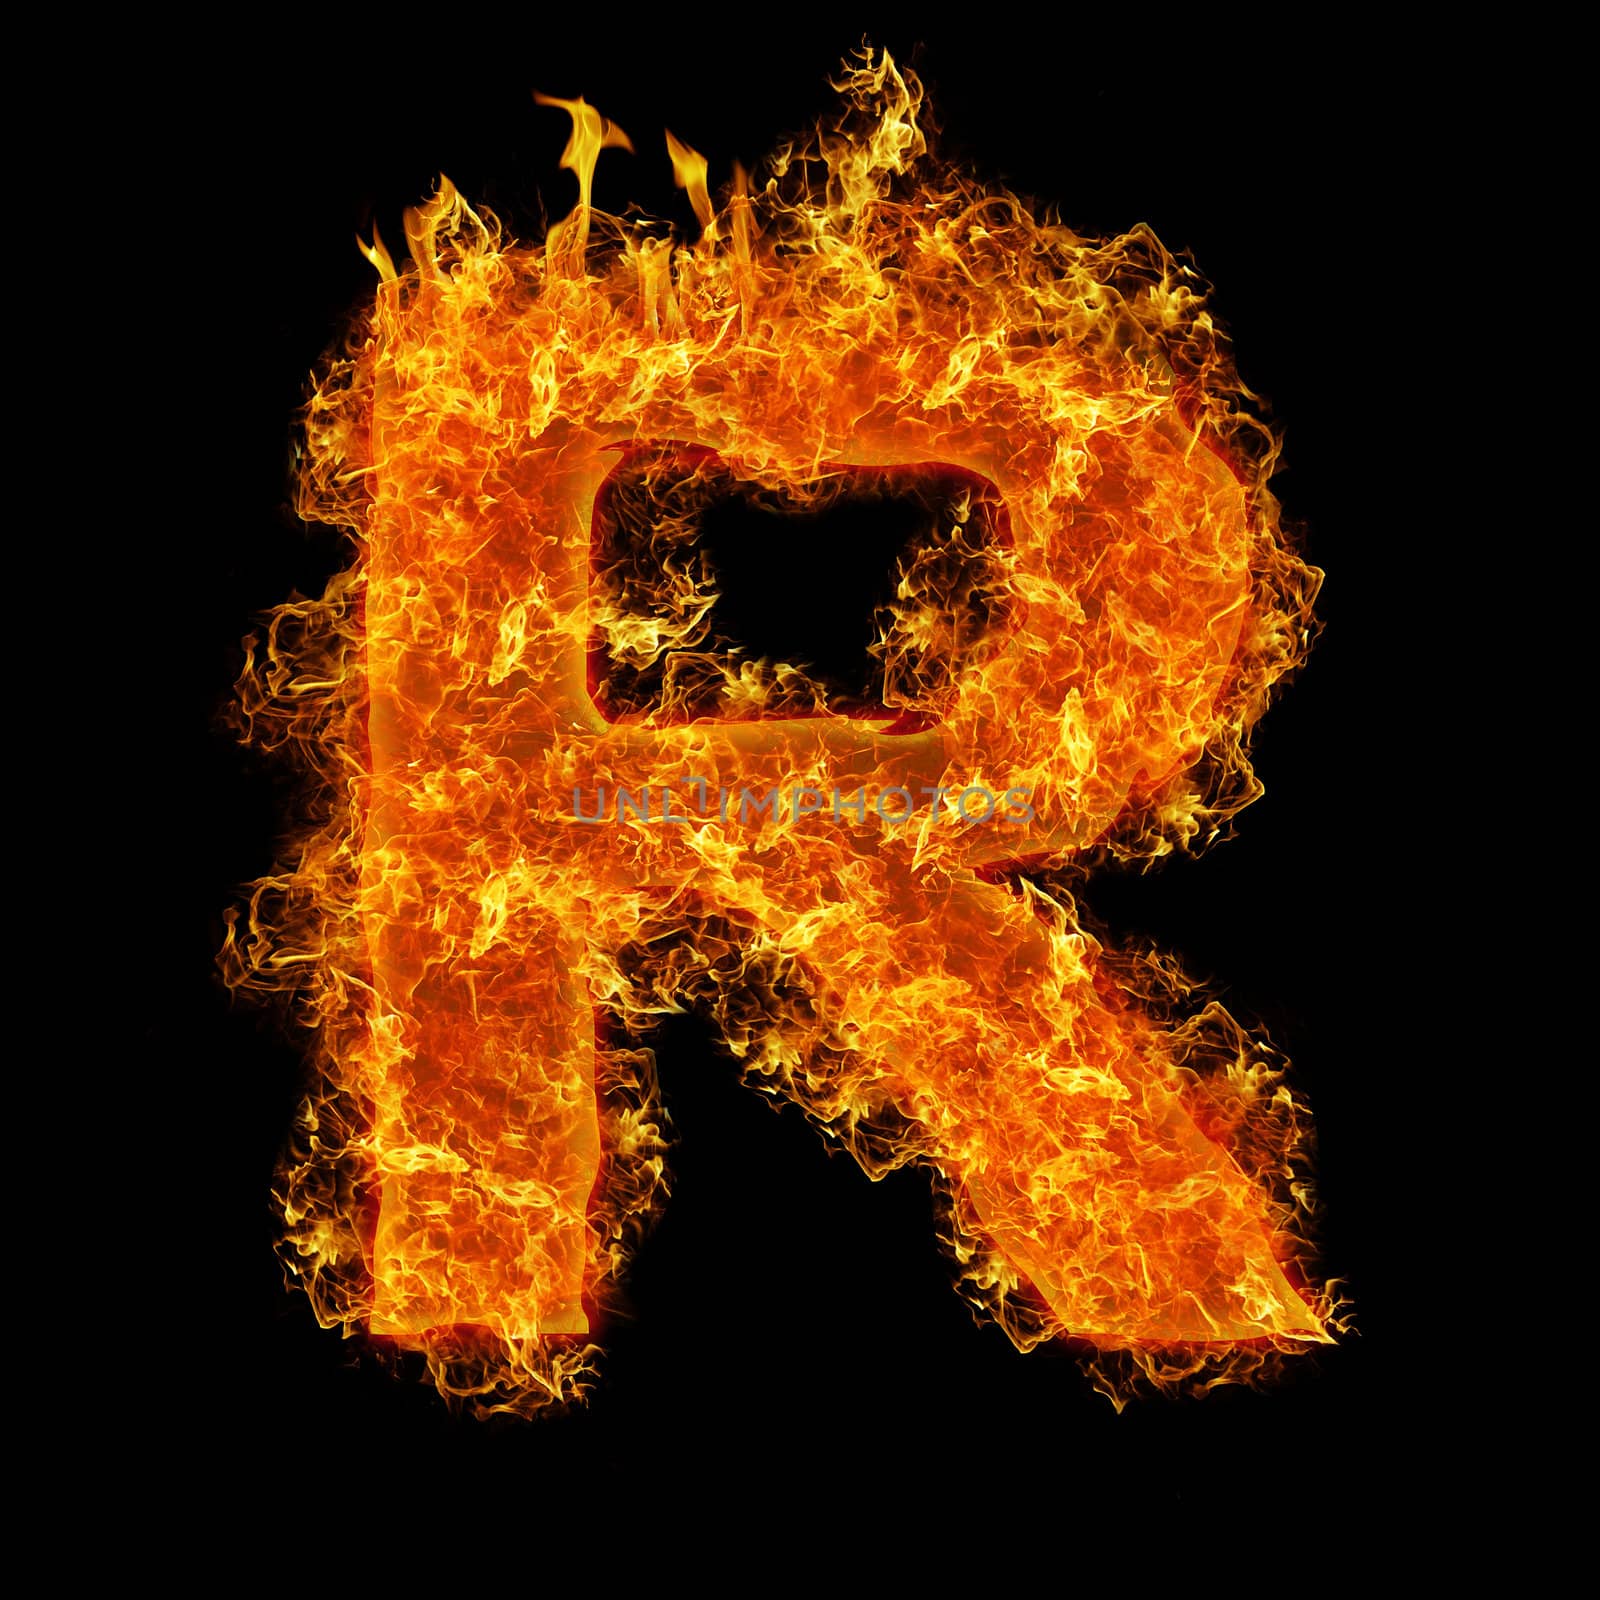 Fire letter R by rusak